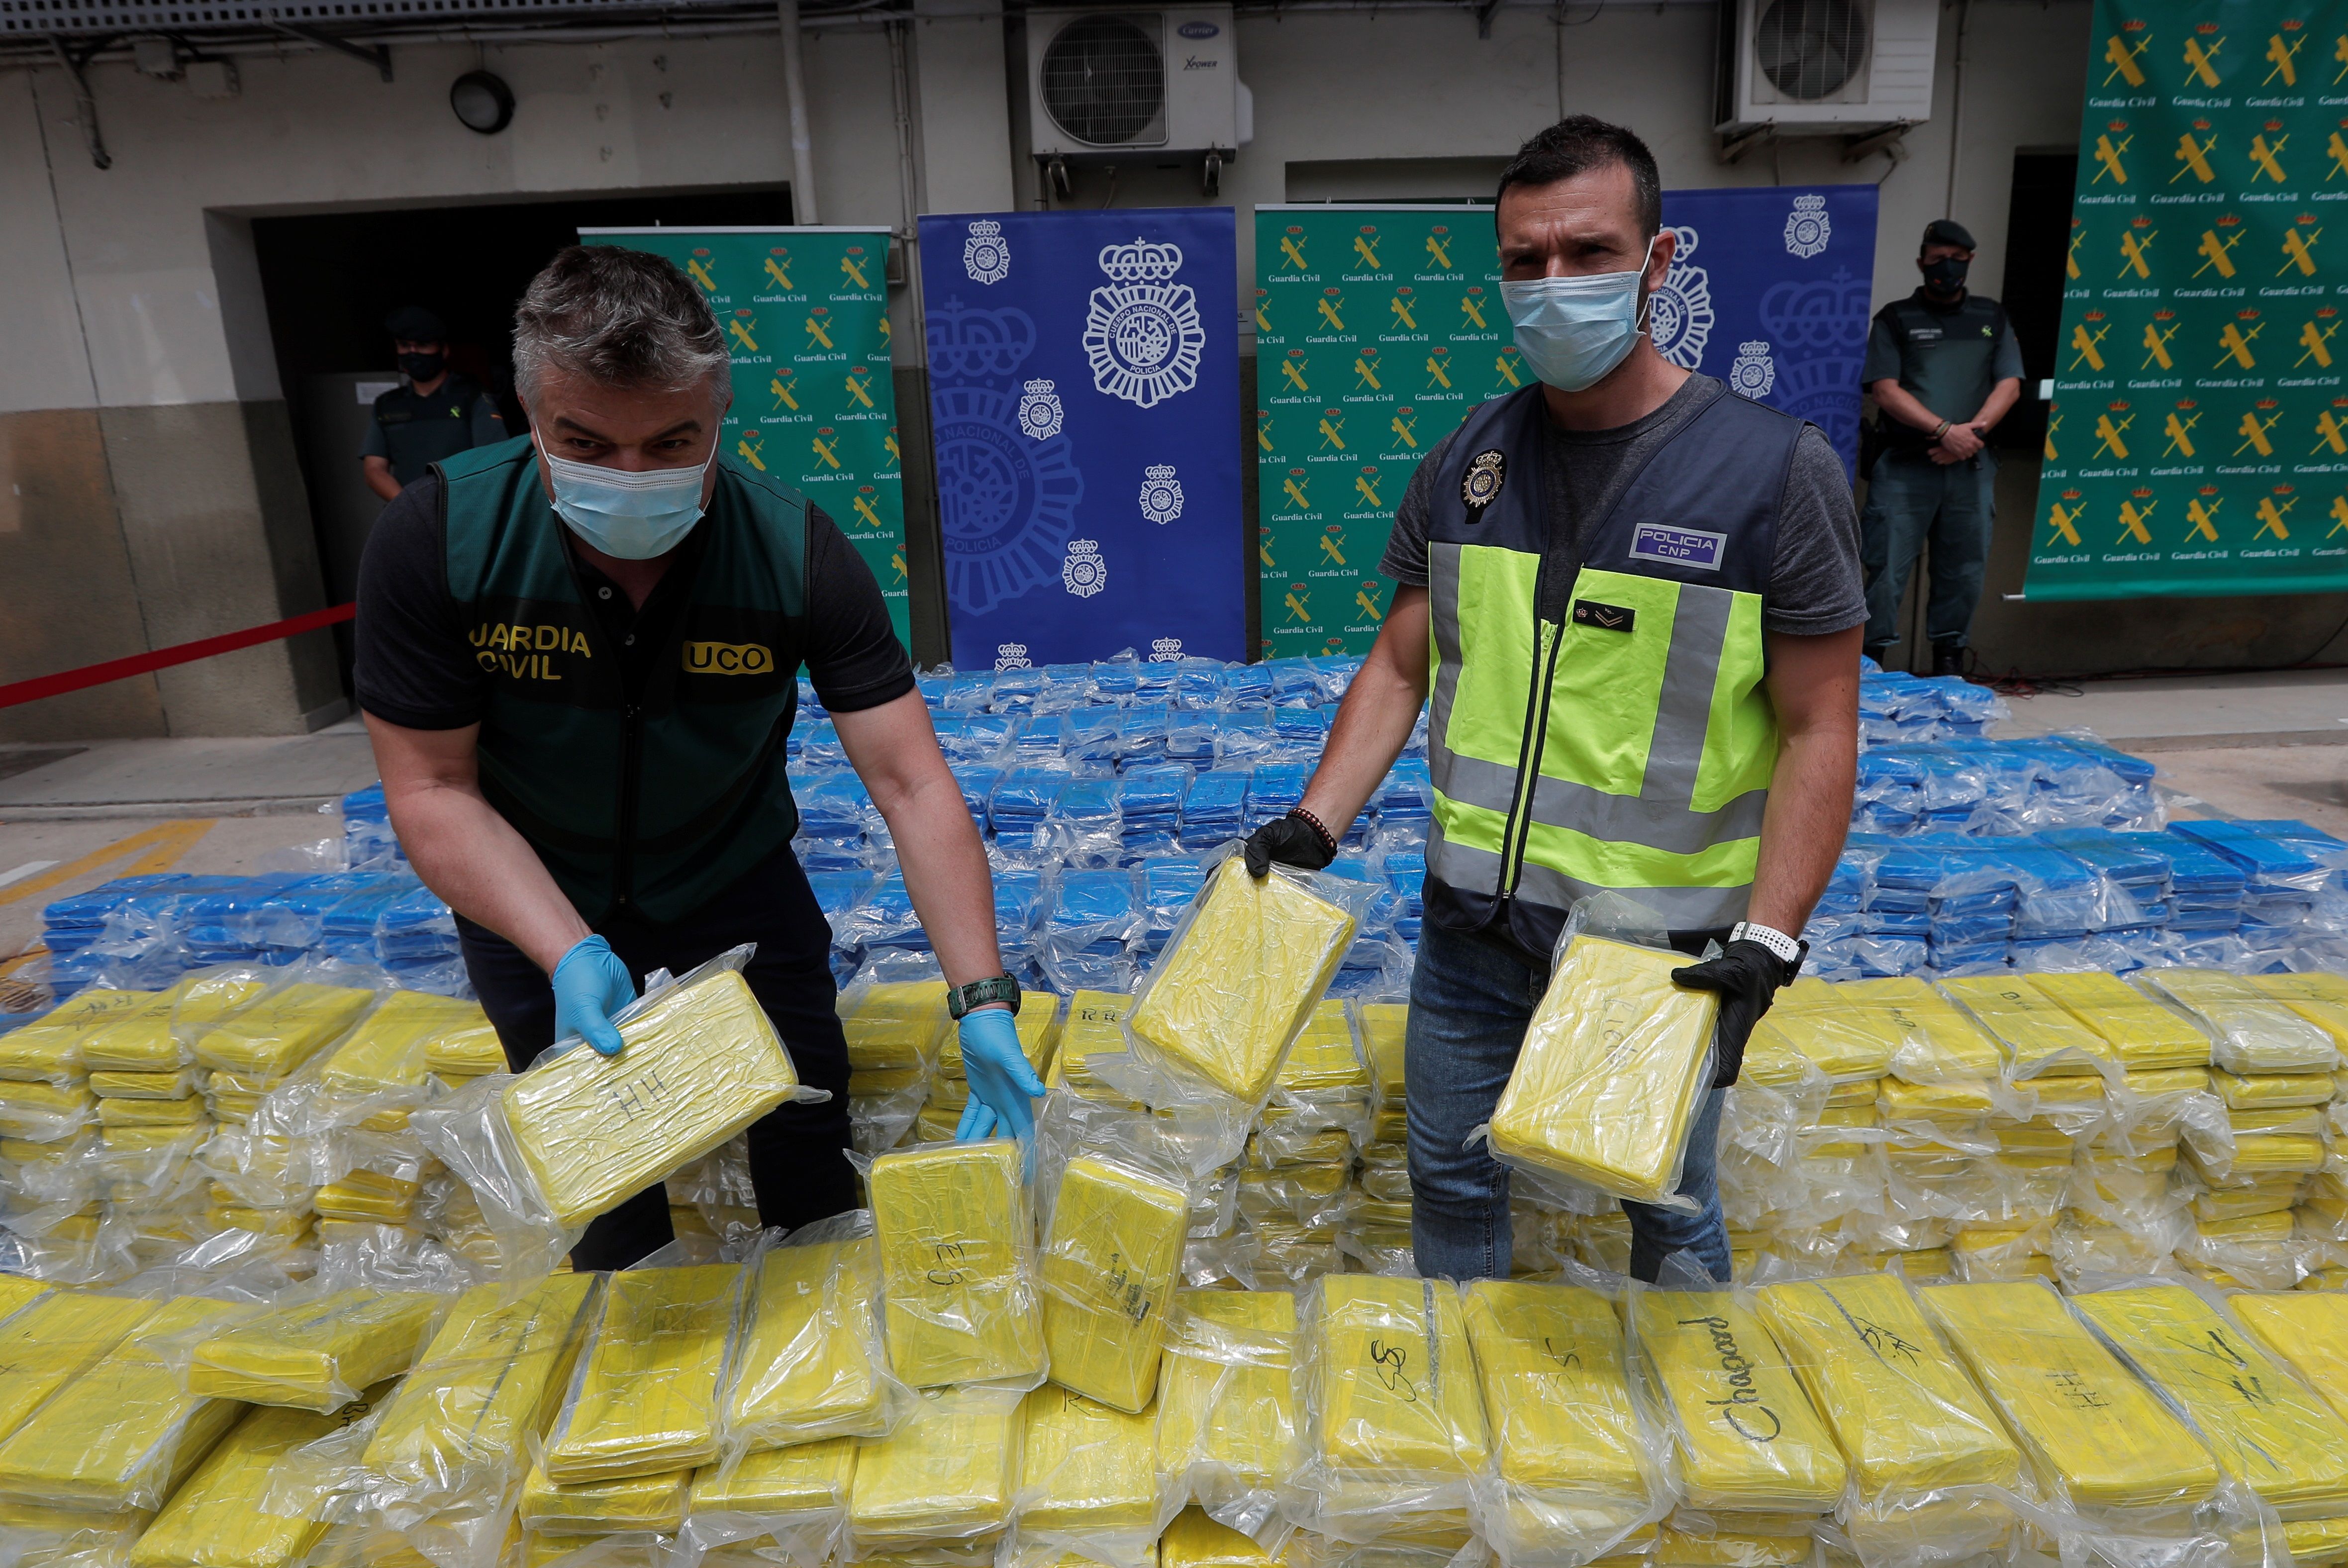 A member of UDYCO (right) and UCO (left) with 3,800 kilos of cocaine seized at the port of Valencia in a joint operation between the National Police and the Civil Guard. 